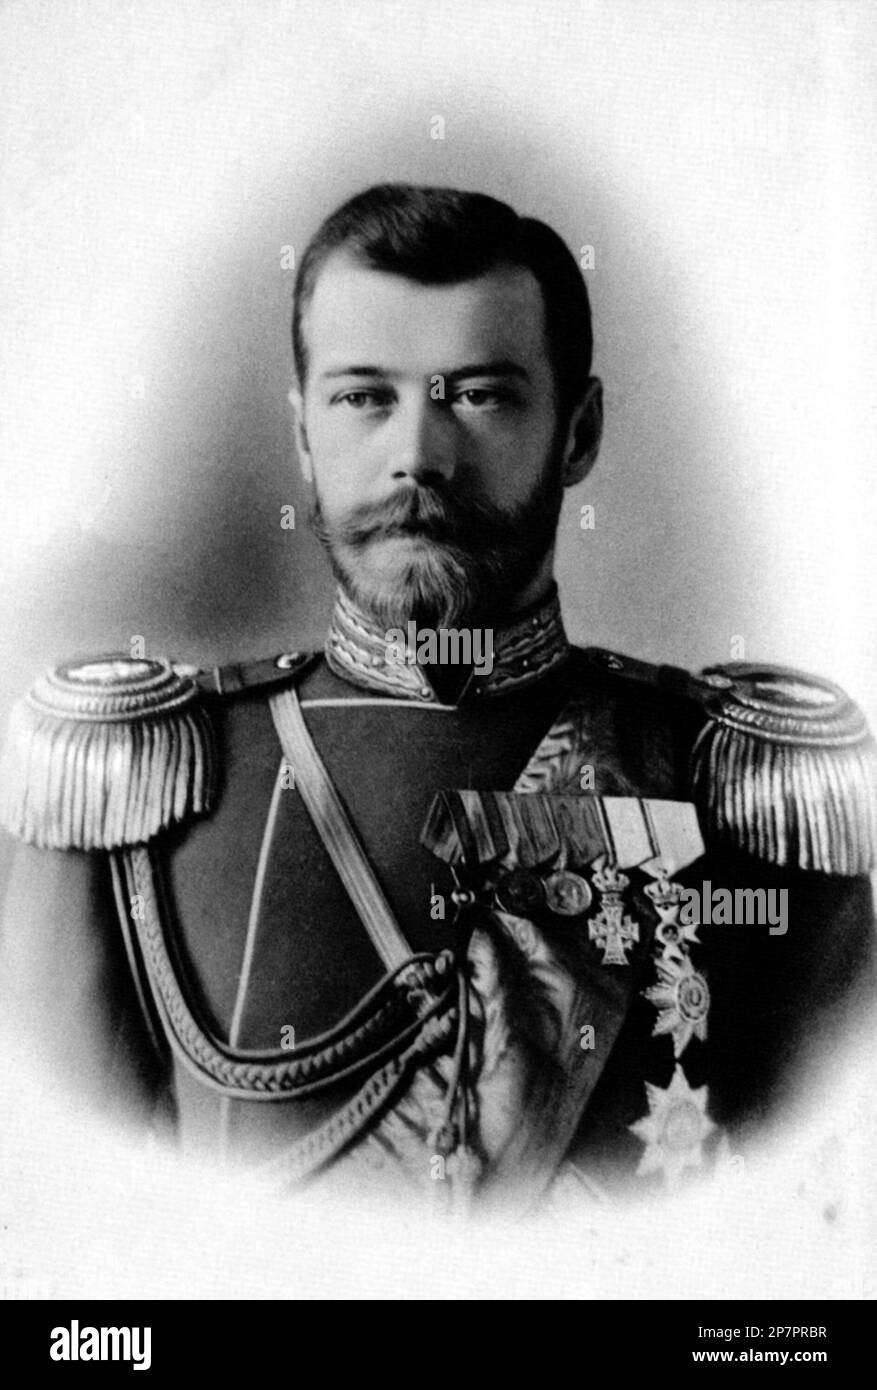 1898 , RUSSIA  : The russian Tsar Nicholas II of Russia ( 1868– 1918) ( Nikolay II) was the last Emperor of Russia, King of Poland and Grand Duke of Finland . He ruled from 1894 until his forced abdication in 1917 . His rule ended with the Russian Revolution of 1917, after which he and his family were executed by Bolsheviks . Subsequent to his canonization, he has been regarded as Saint Nicholas The Passion Bearer by the Russian Orthodox Church . - foto storiche - foto storica  - beard - barba - portrait - ritratto - nobiltà  - nobility - nobili  - nobile - BELLE EPOQUE  - RUSSIA - ZAR - Czar Stock Photo